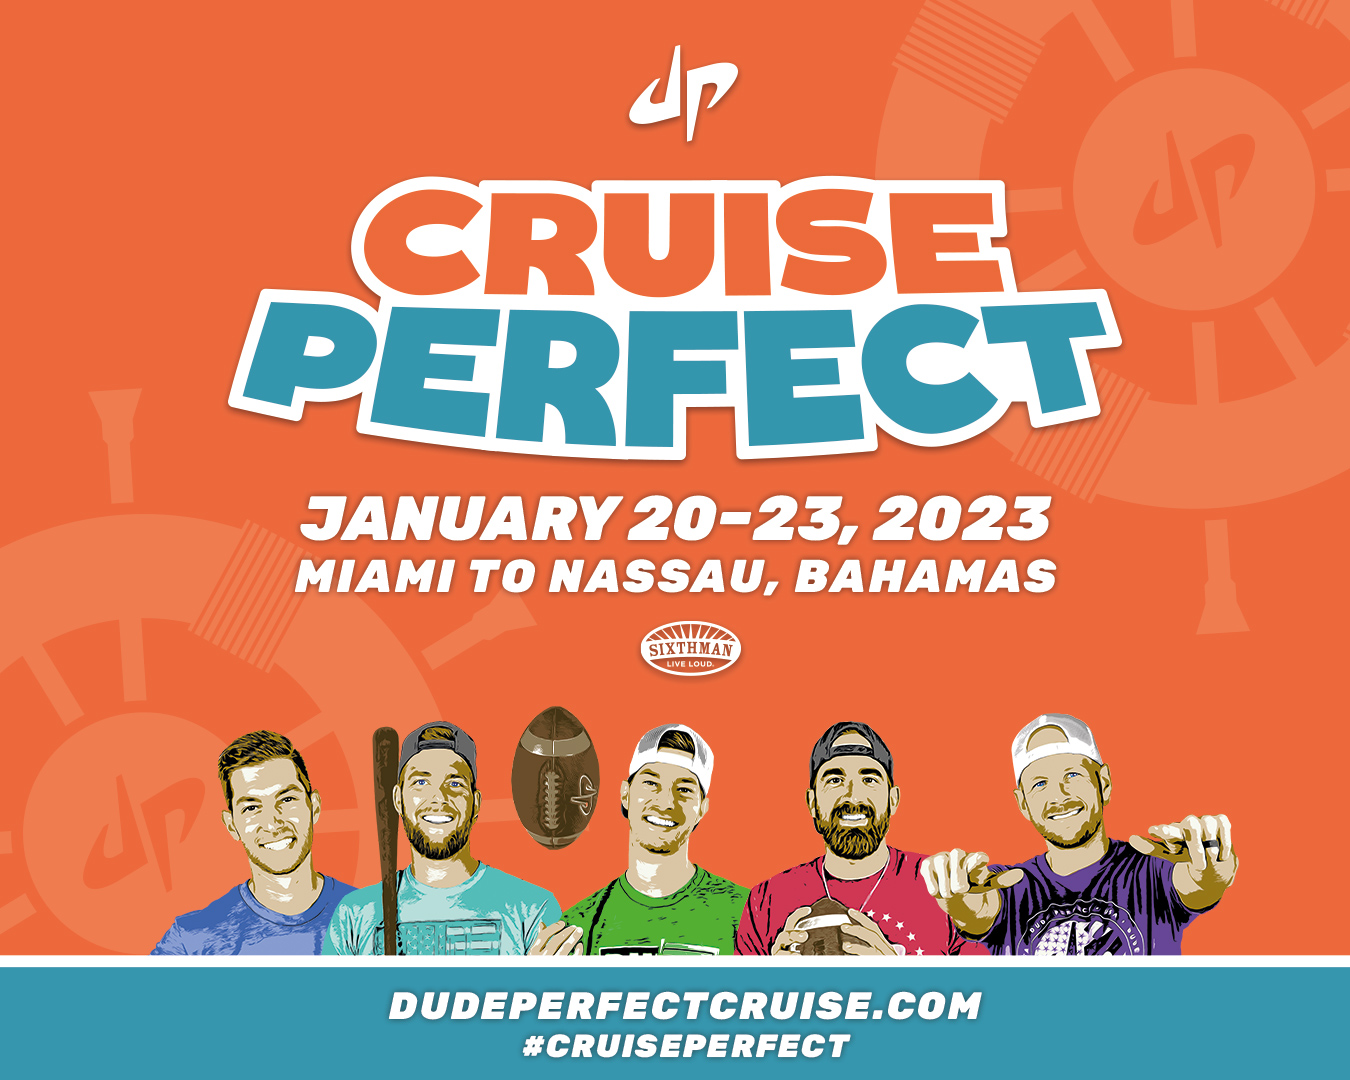 We Offer Payment Options - Dude Perfect Cruise